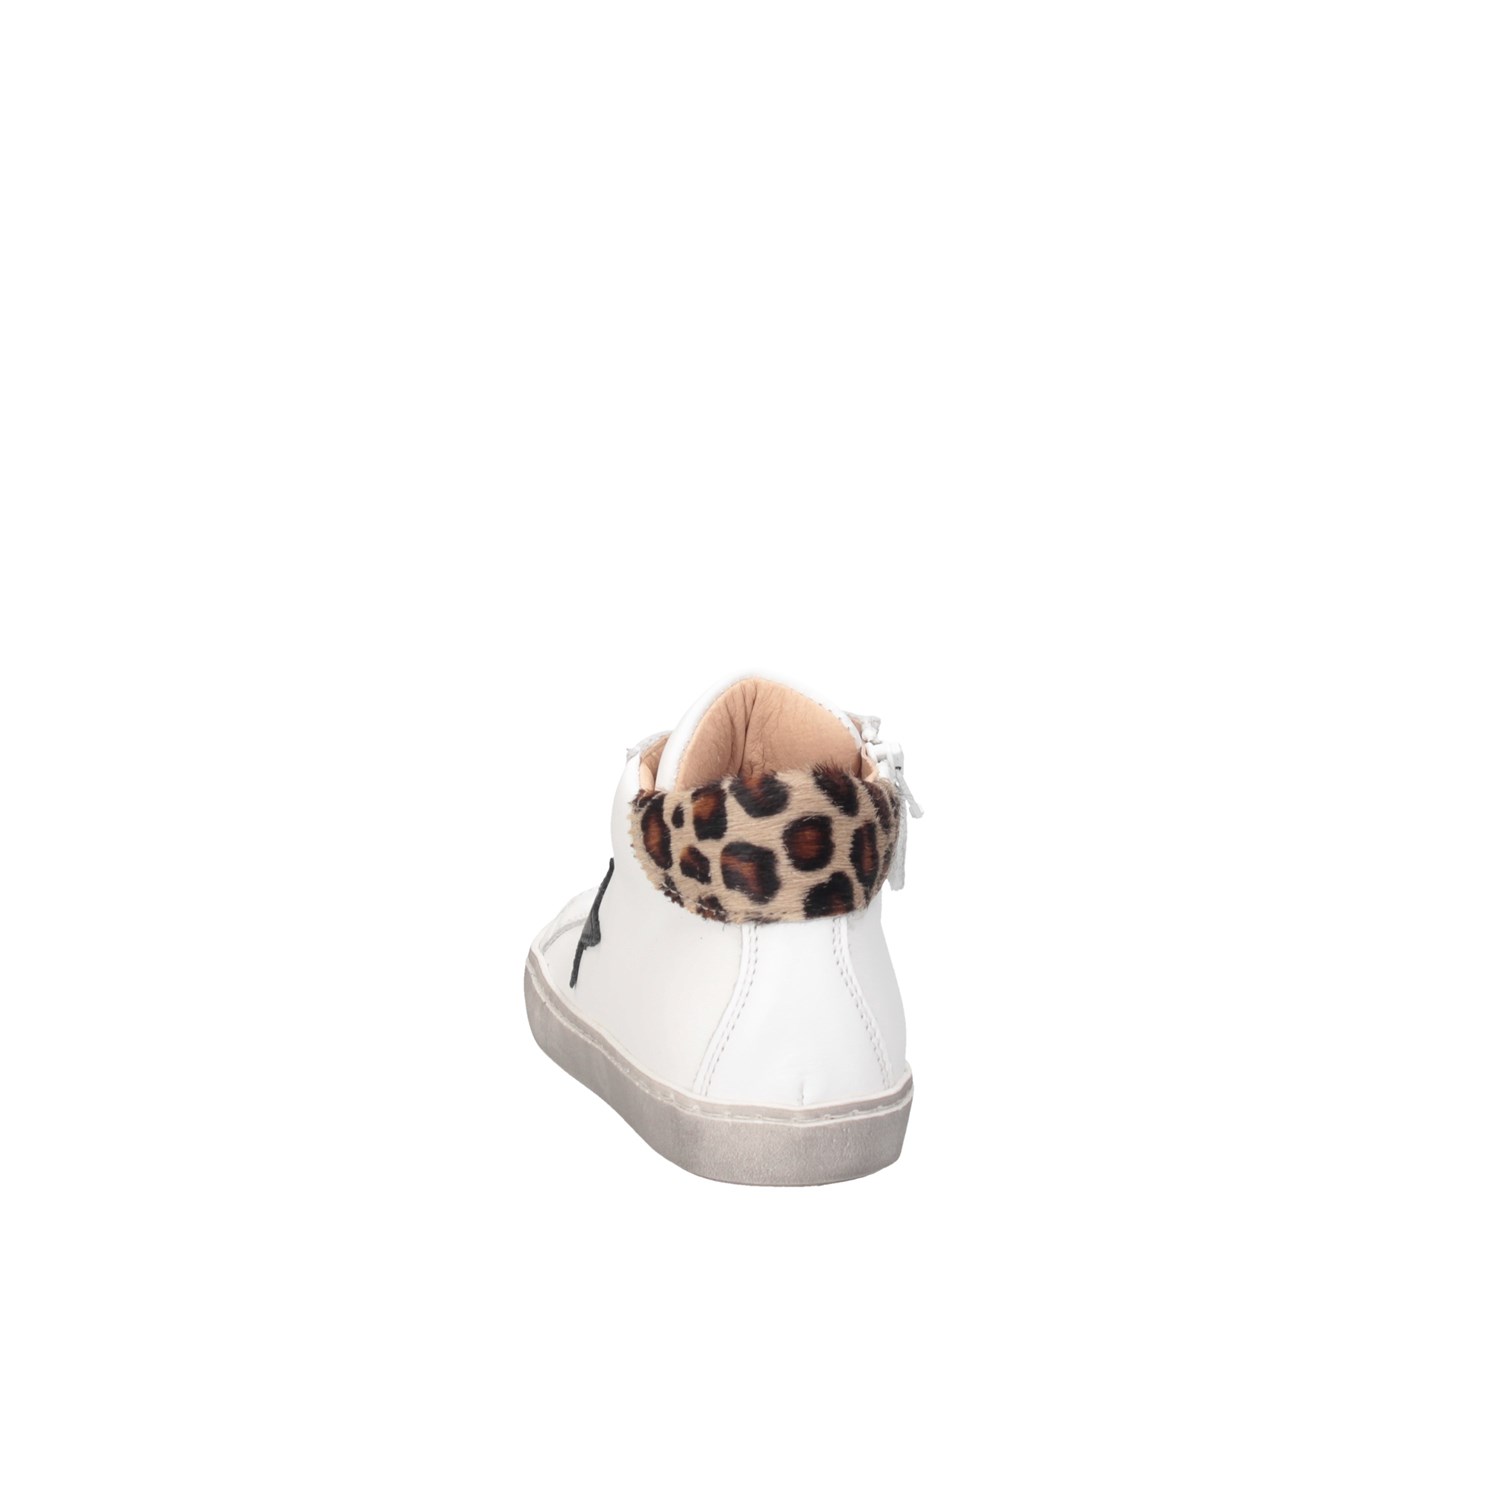 Dianetti Made In Italy I9890 Leopard print Shoes Child 